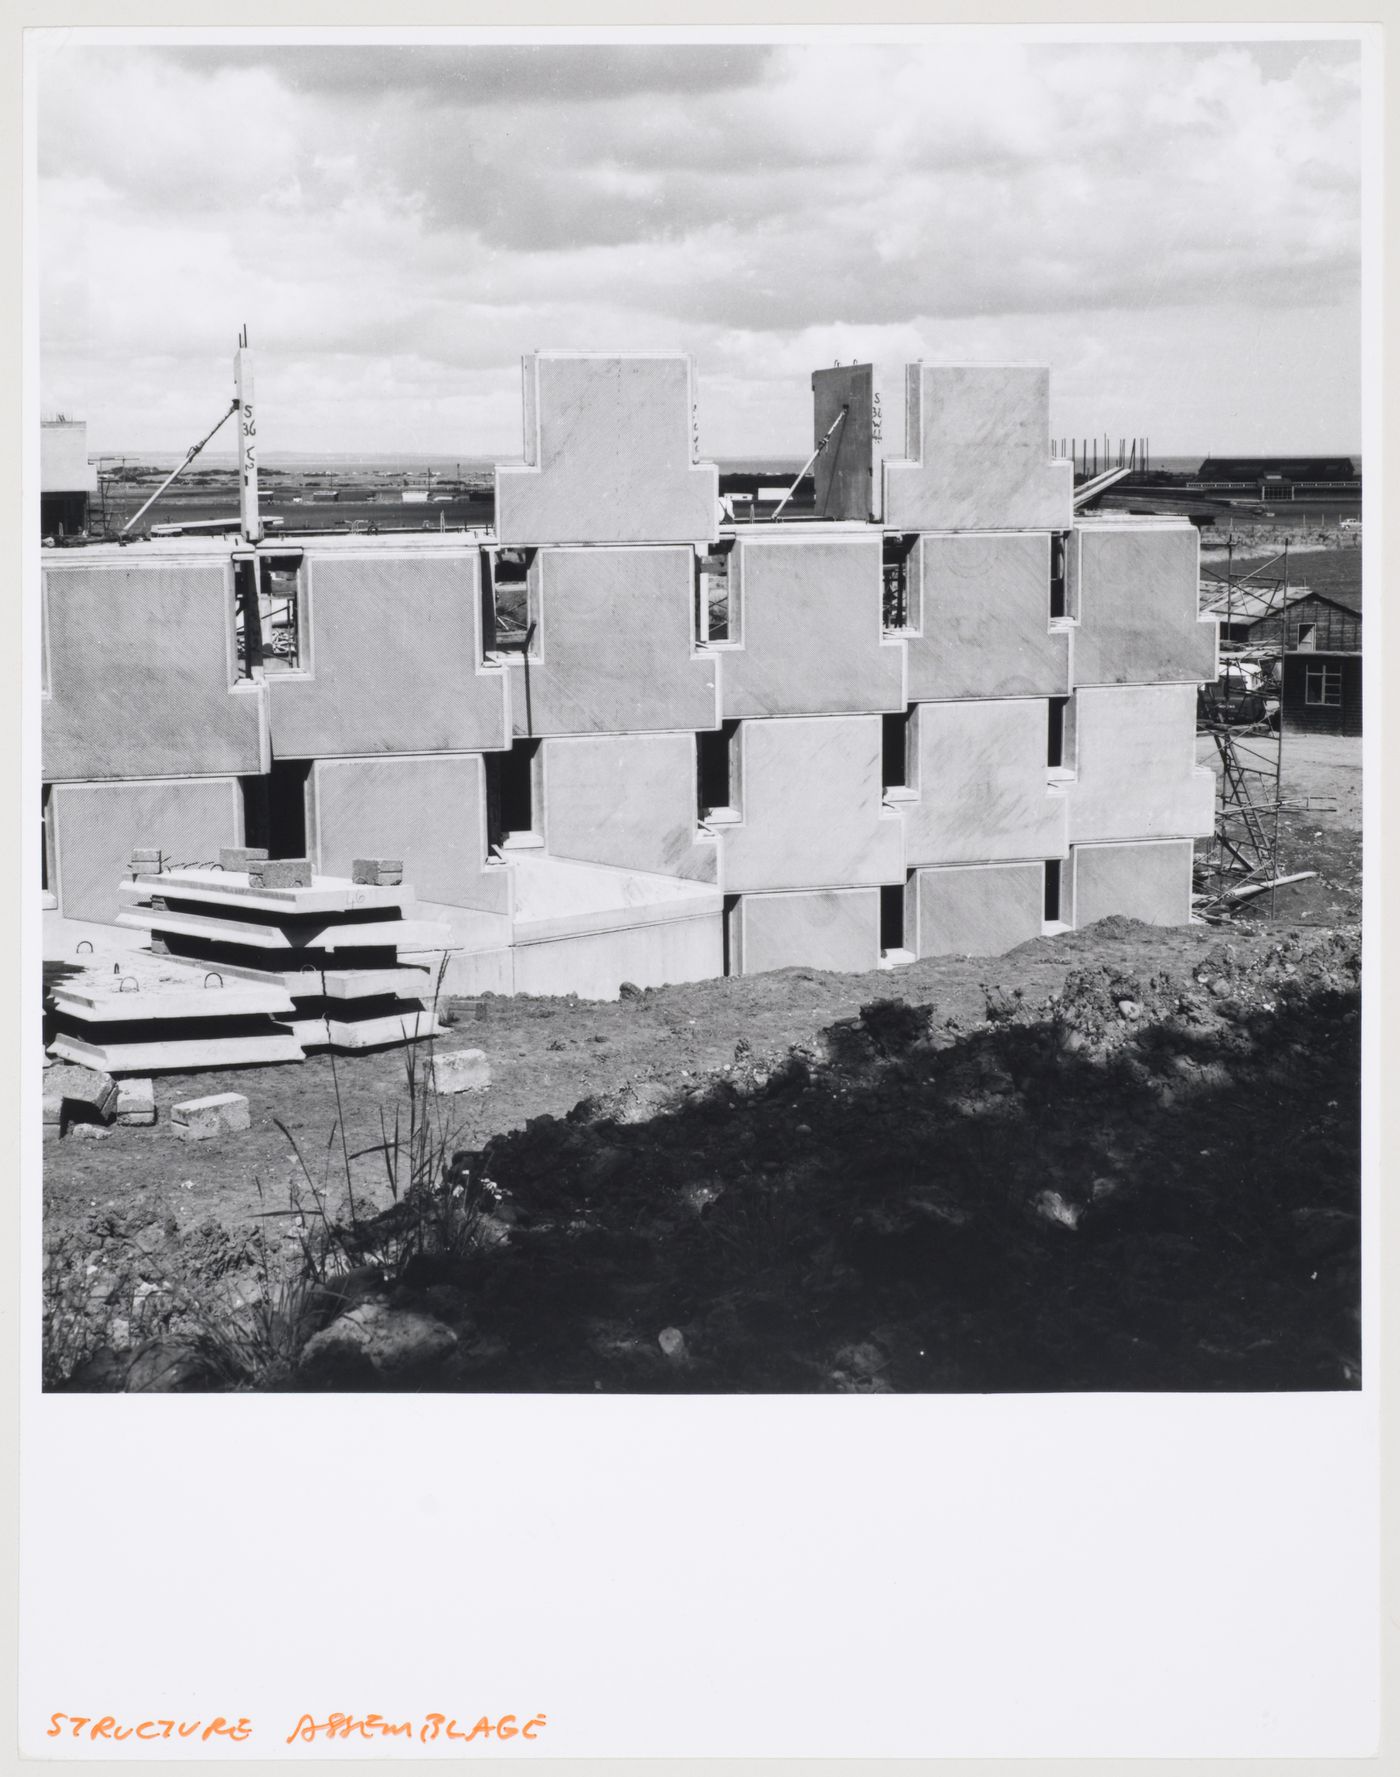 Students' Residence, University of St. Andrews, St. Andrews, Scotland: view of building site